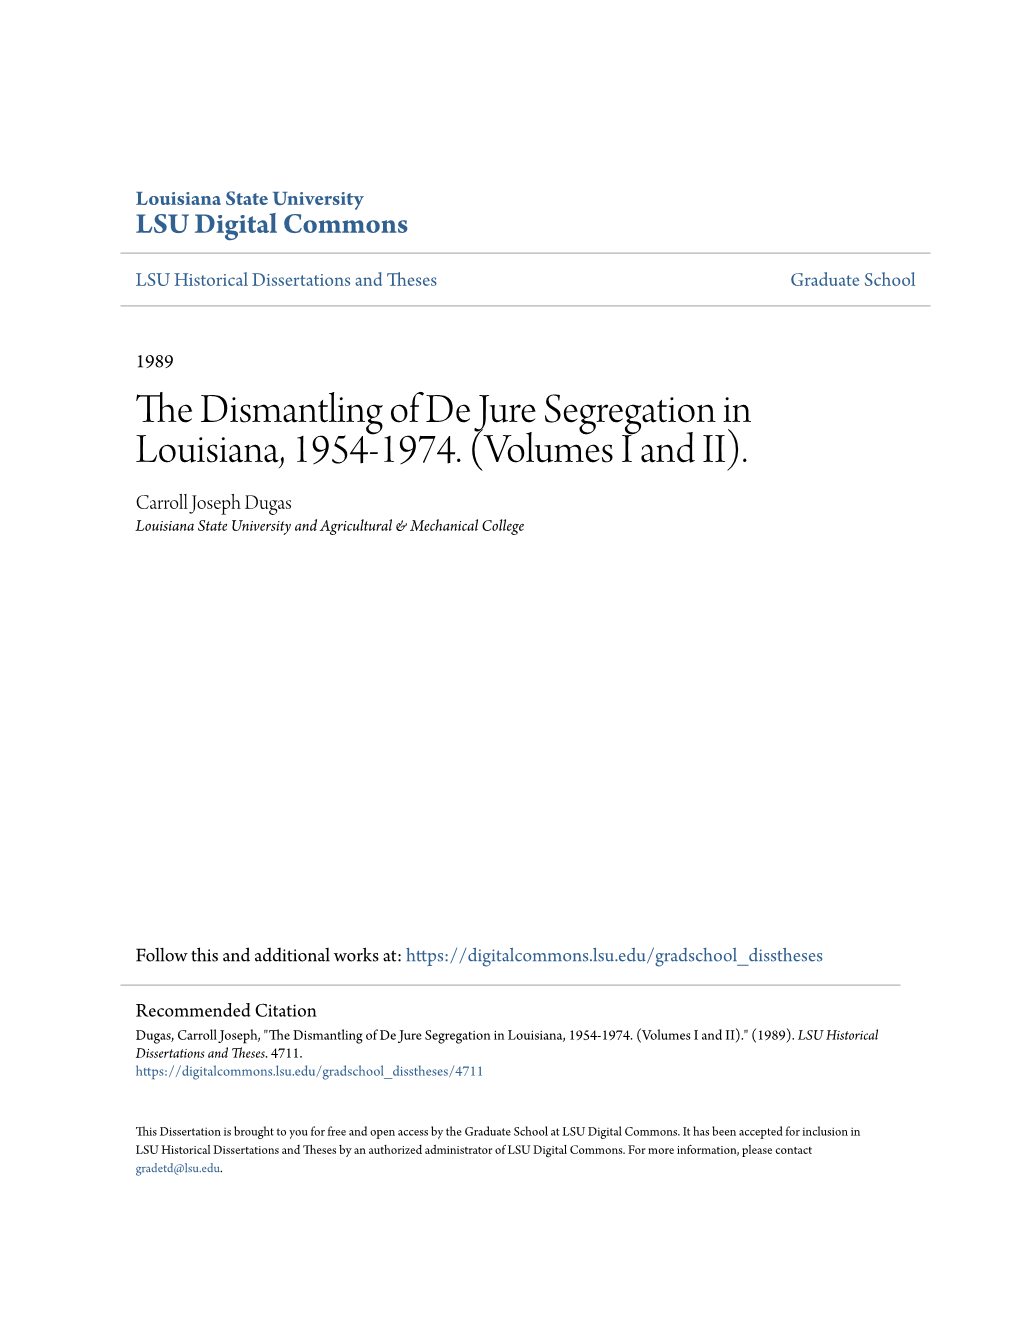 The Dismantling of De Jure Segregation in Louisiana, 1954-1974. (Volumes I and II)